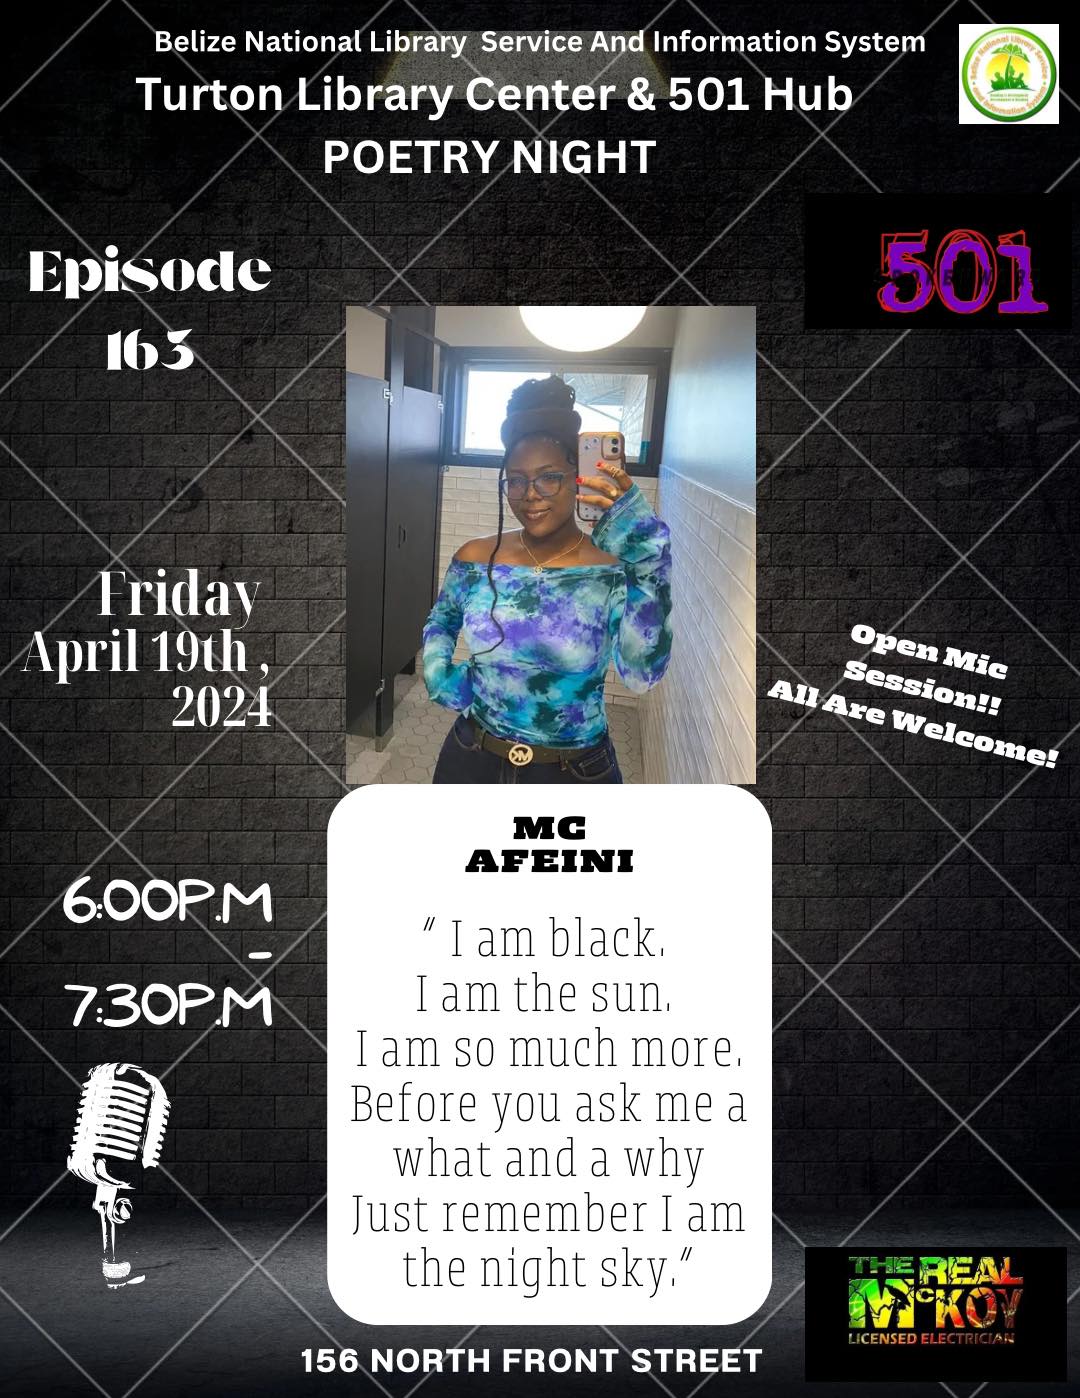 Poetry Night at TLC